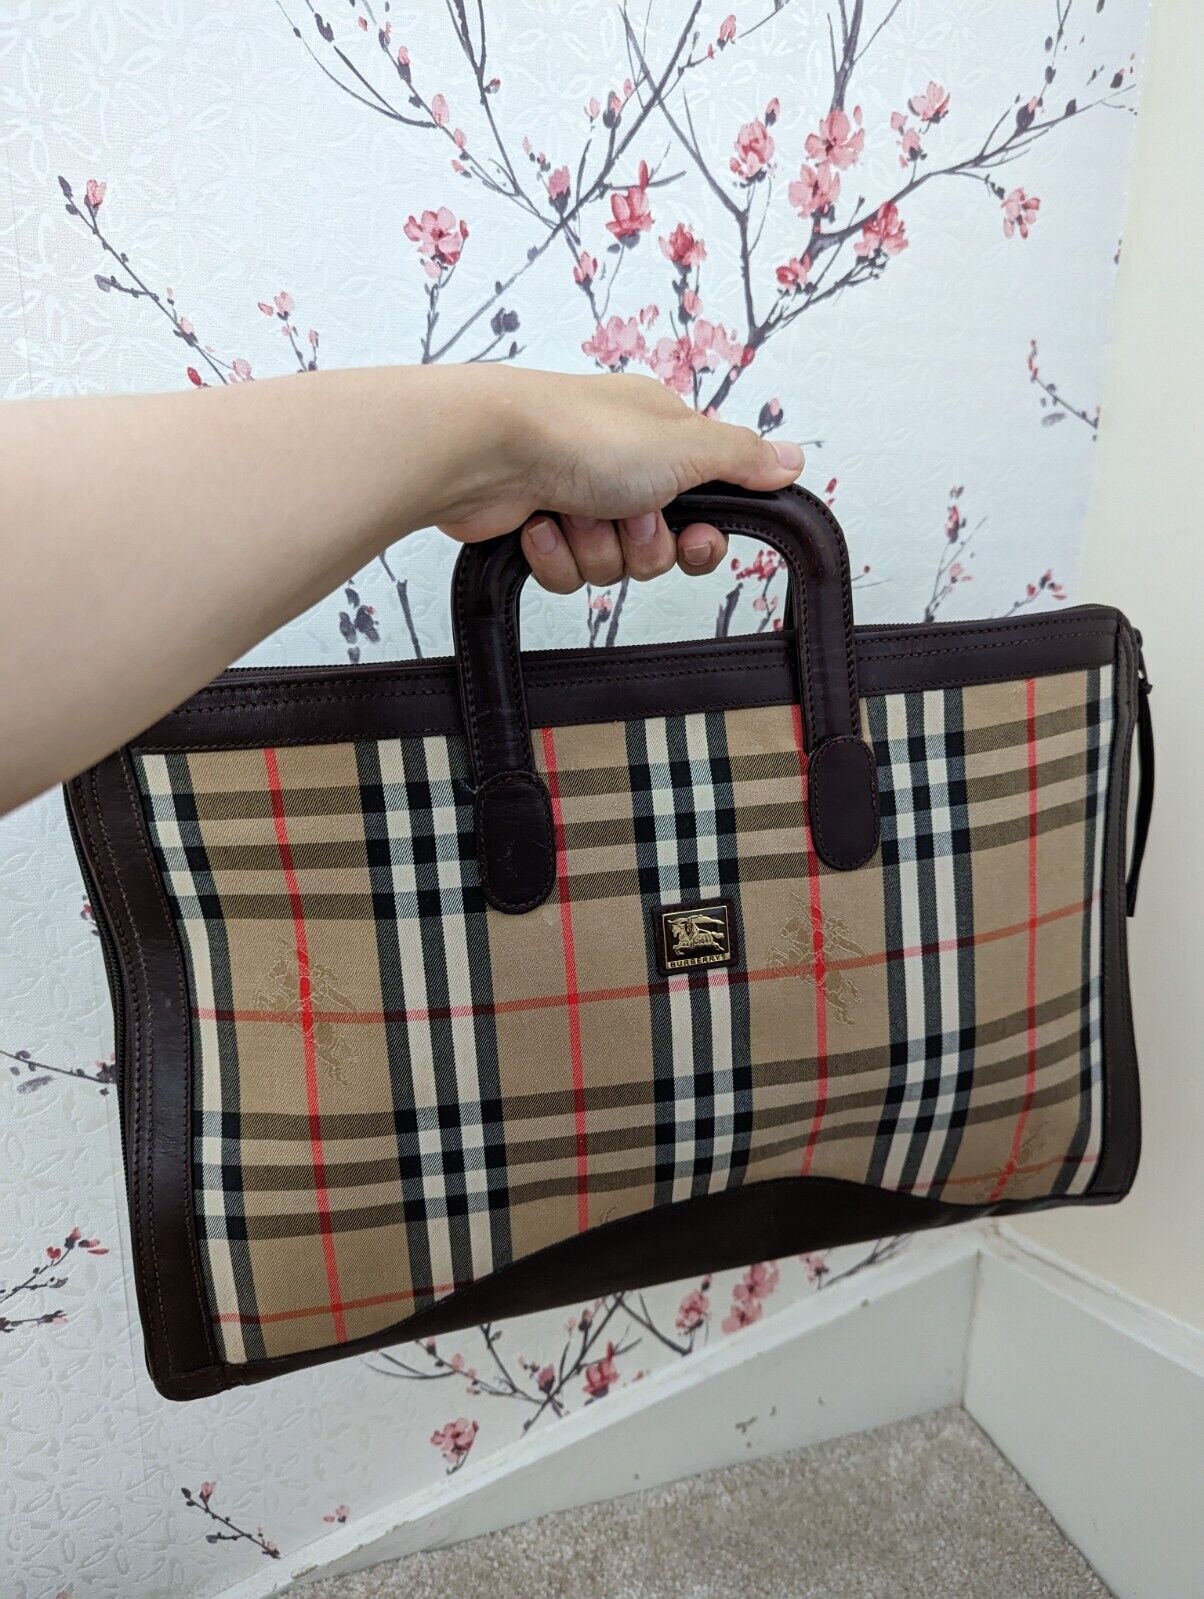 Burberry The Medium Reversible Tote In Haymarket Check And Leather